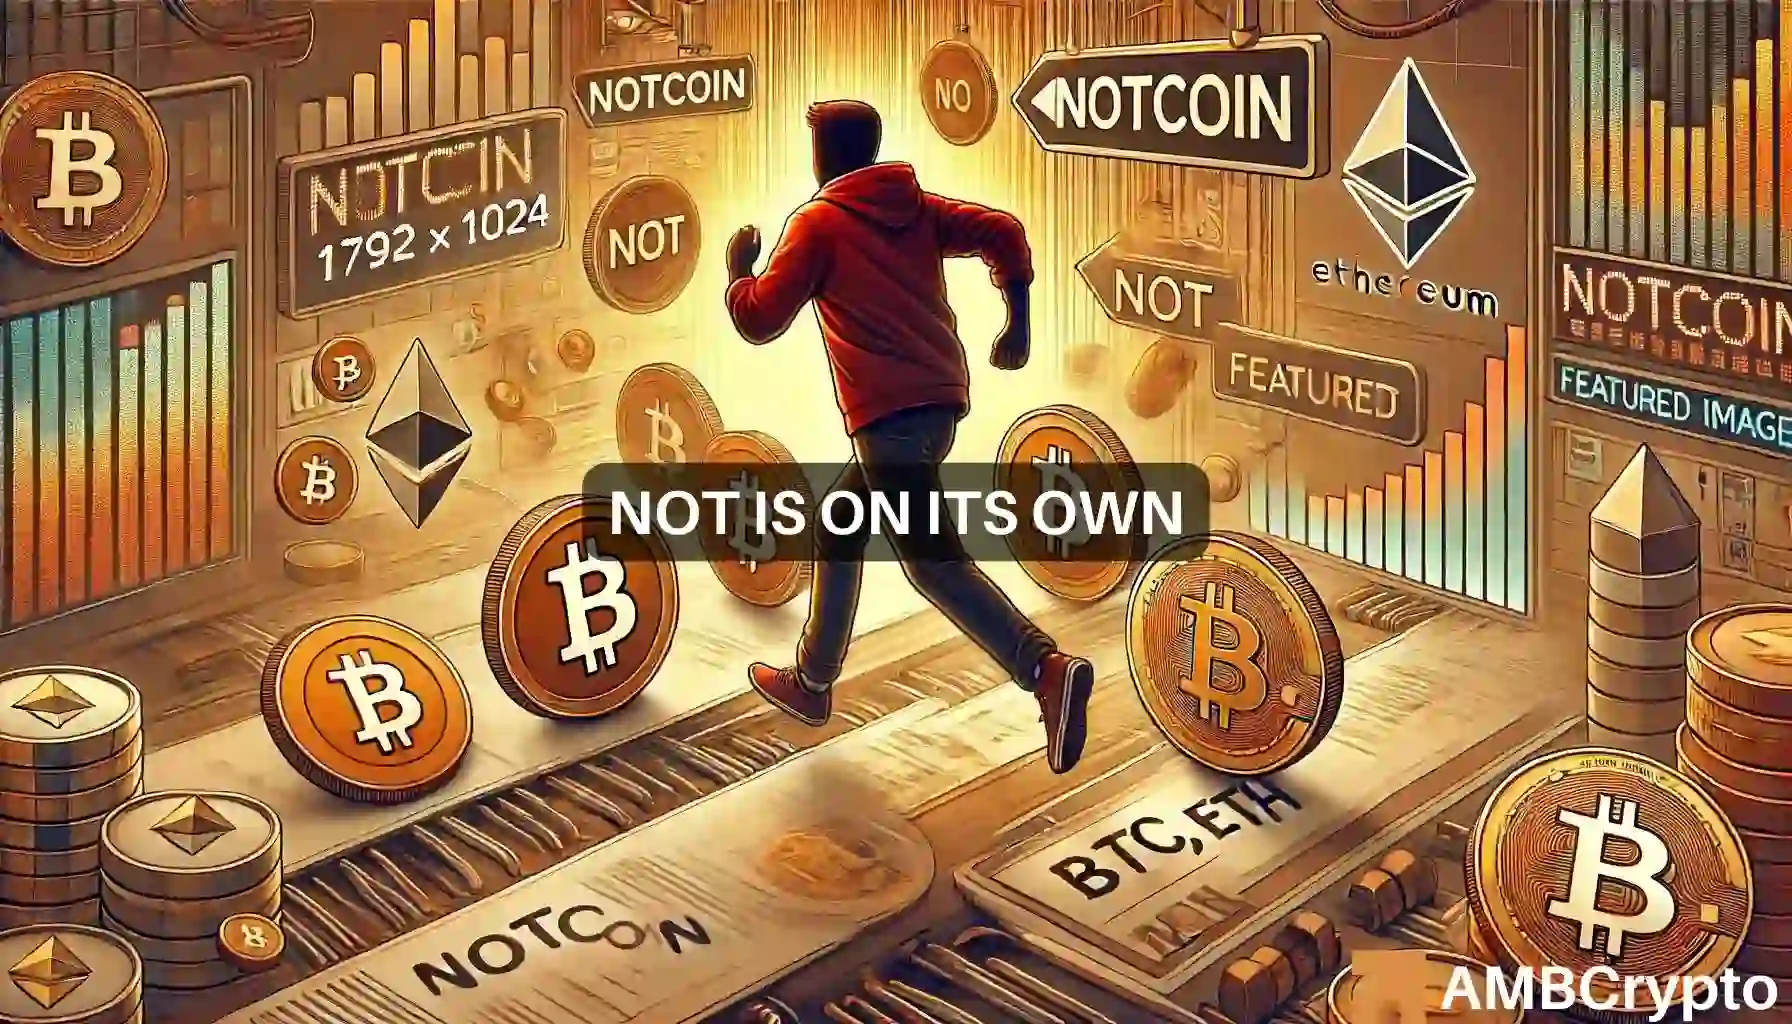 Notcoin’s price surge – Here’s how it outperformed Bitcoin, Ethereum